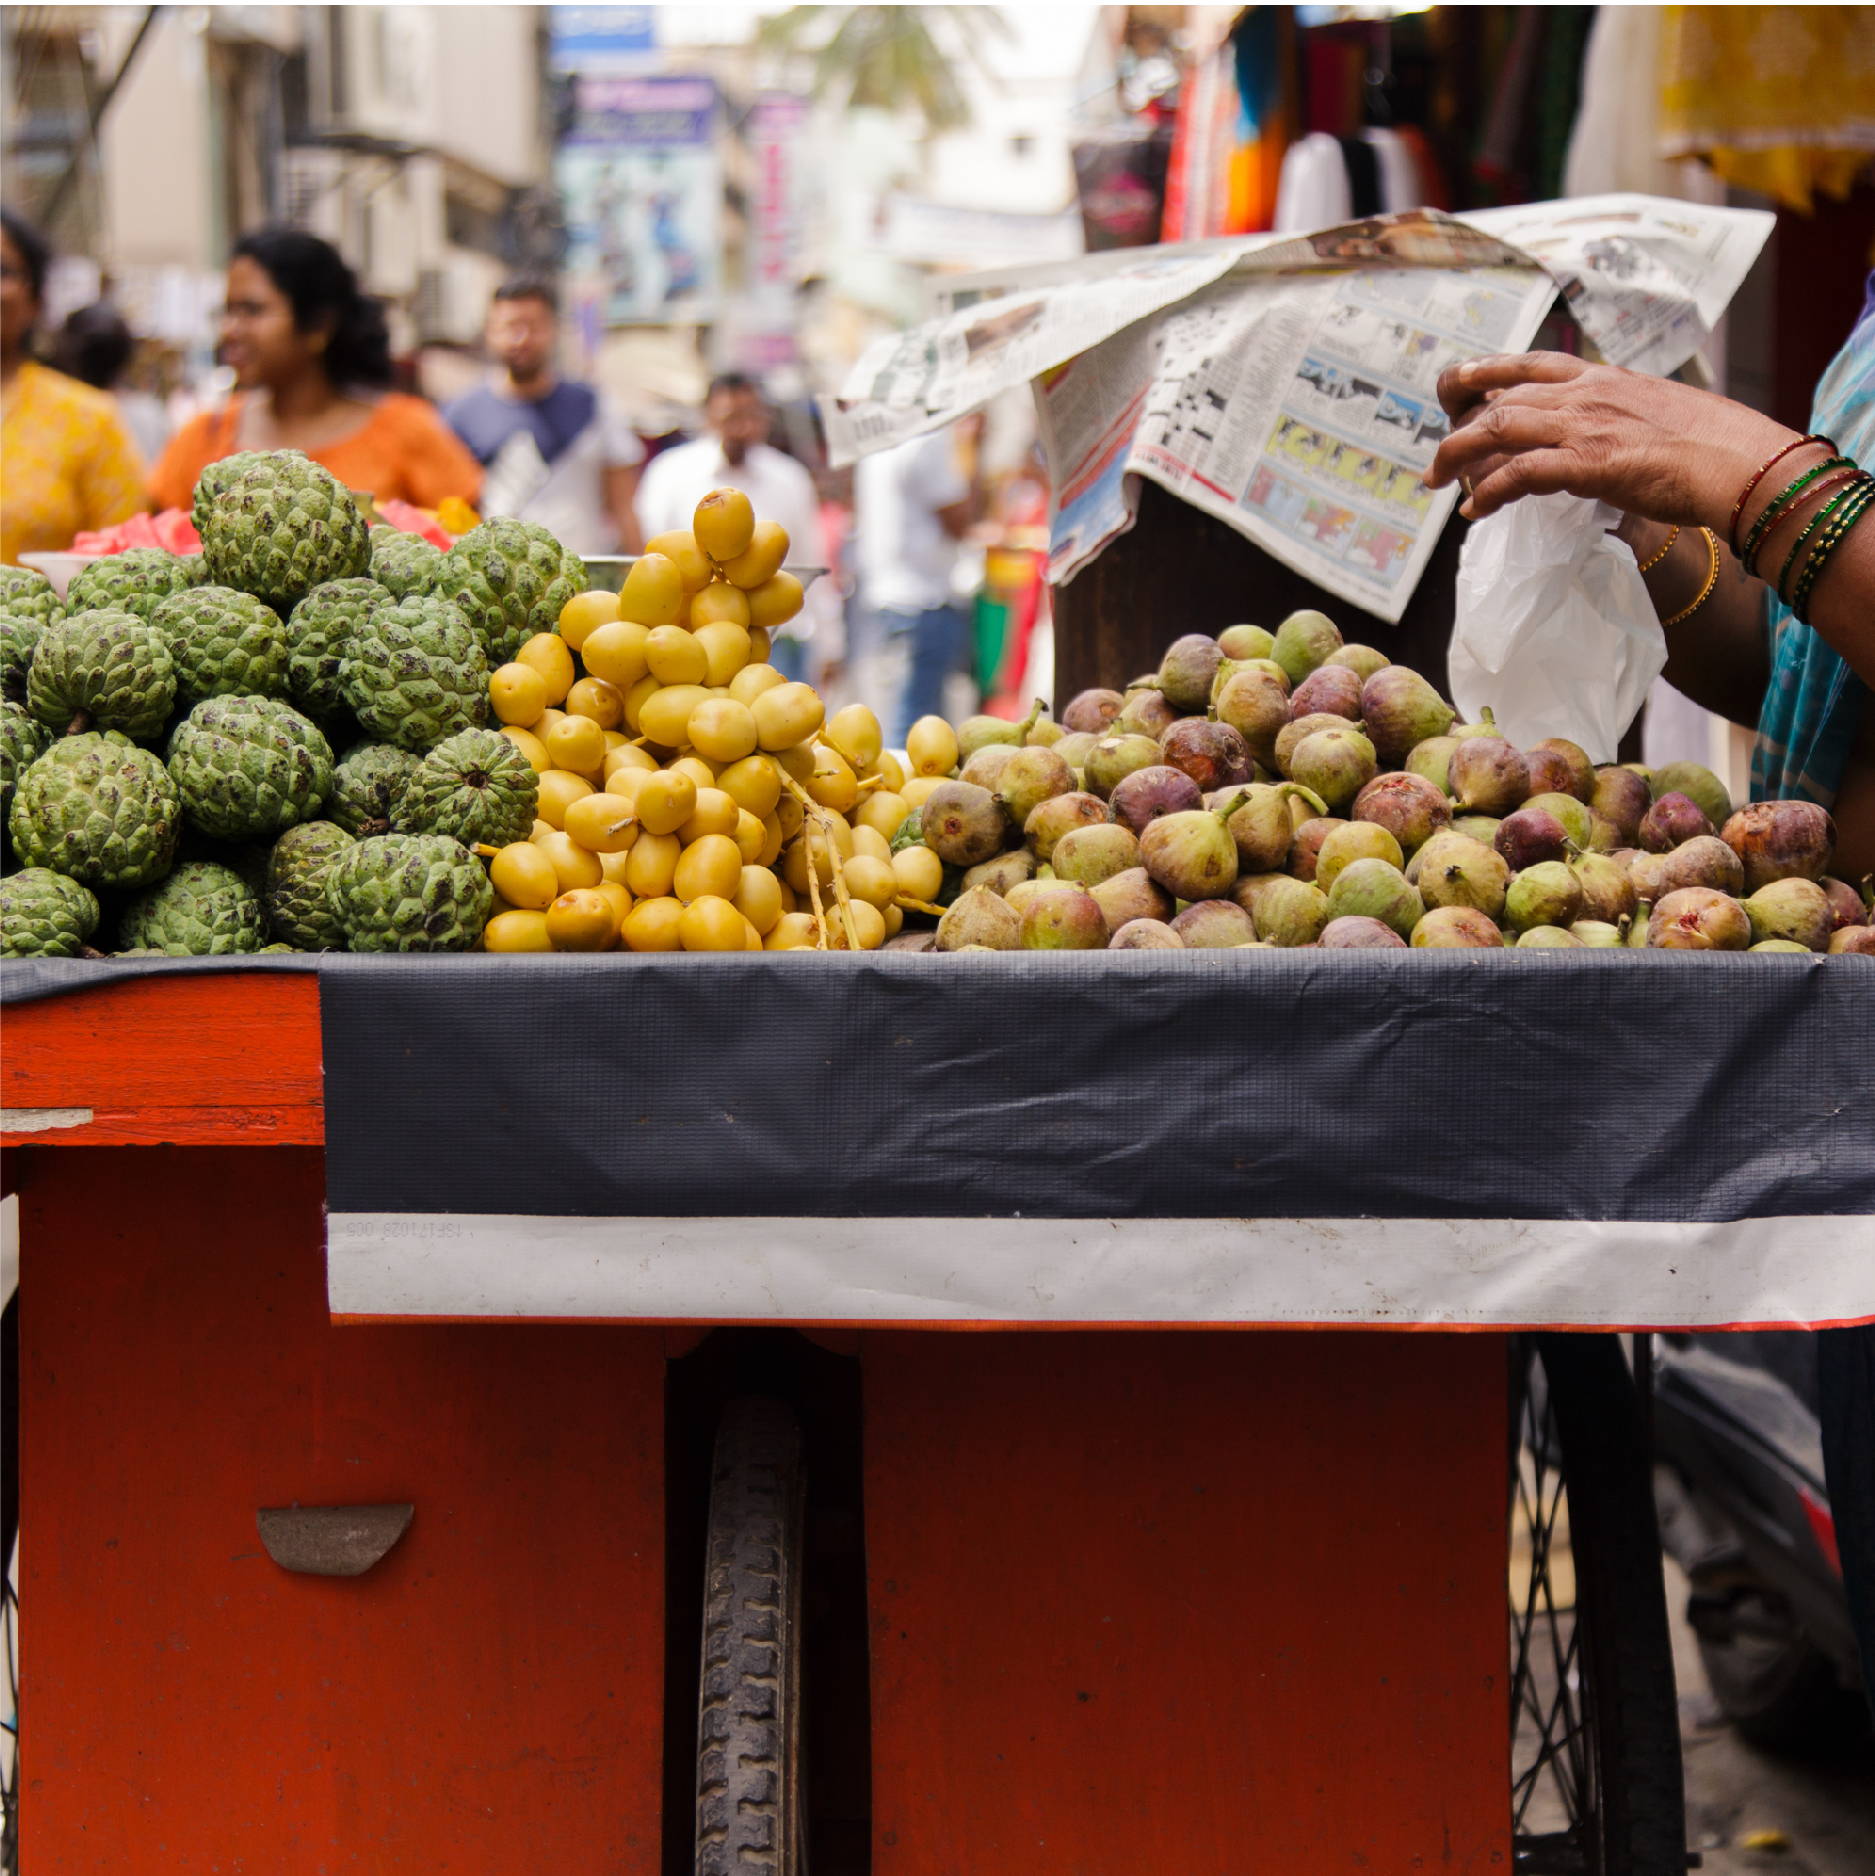 A street vendor on a crowded Bangalore India street, serves ripe figs, dates, and other fruits from her red bike-drawn cart